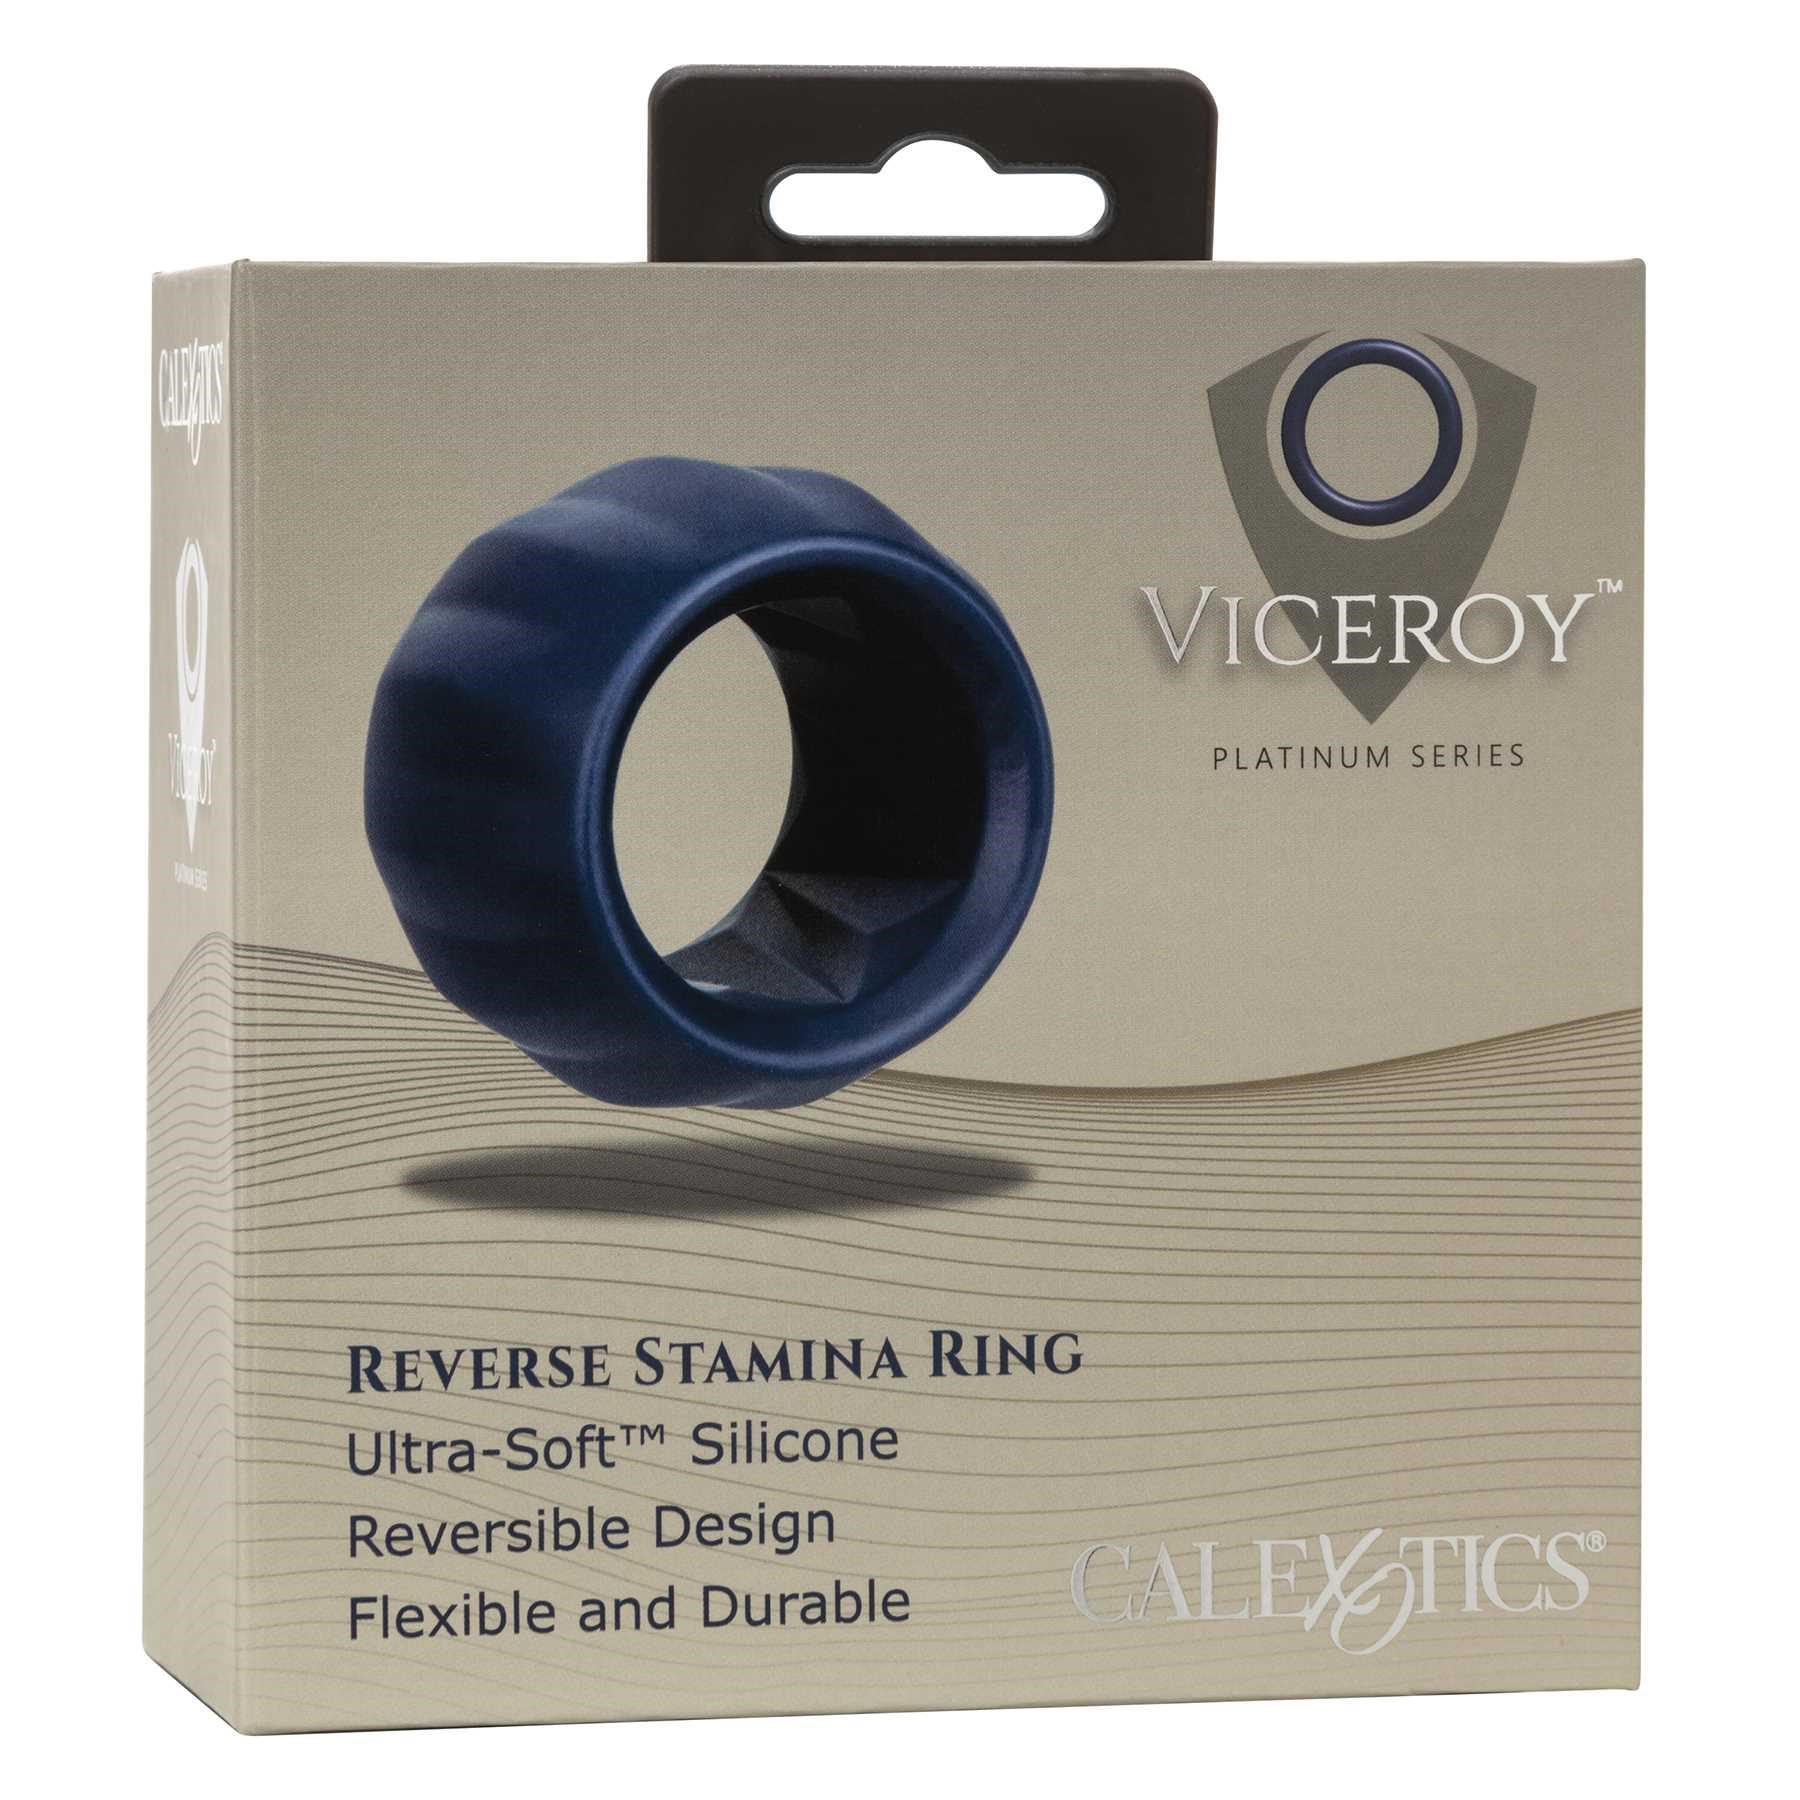 Viceroy Reverse Stamina Ring front of box